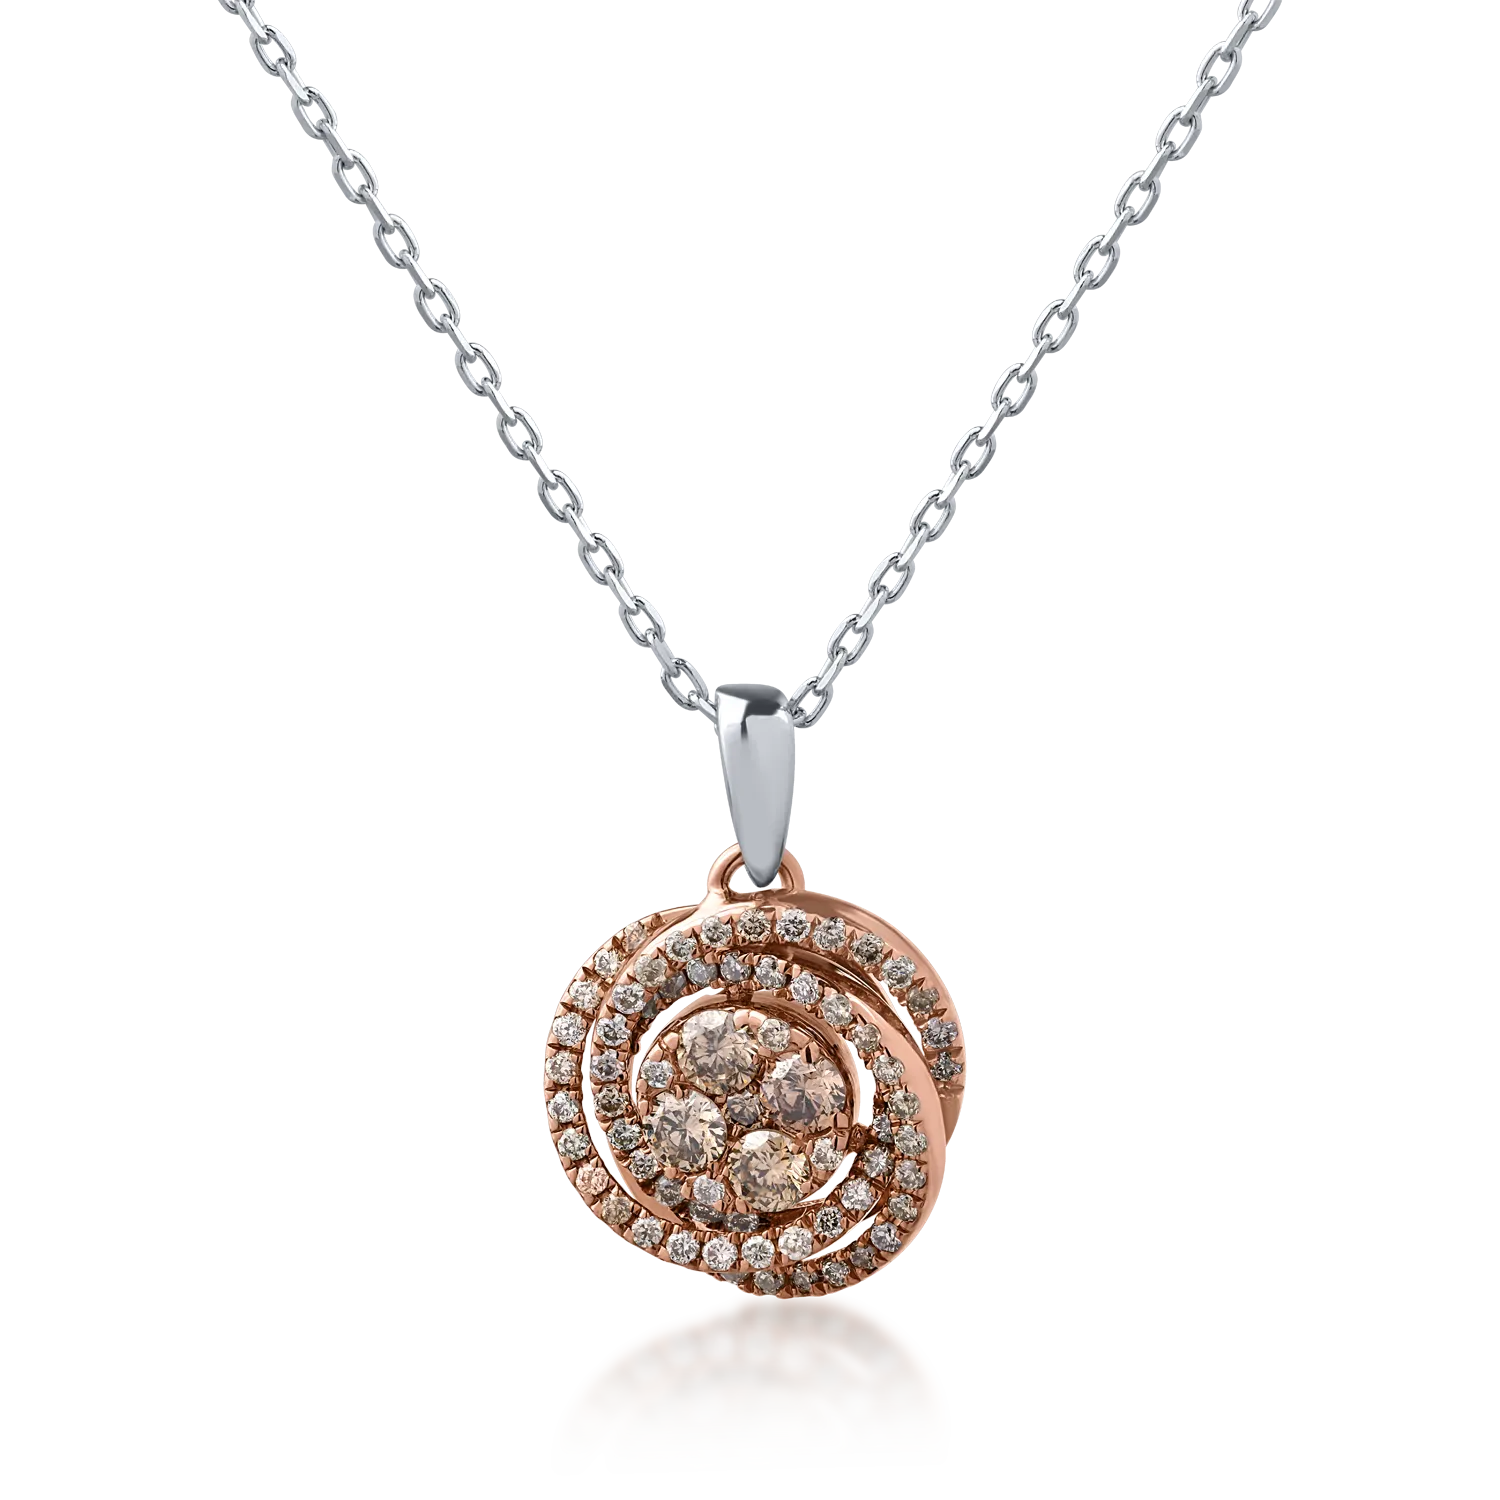 18K white-rose gold pendant necklace with 0.34ct brown diamonds